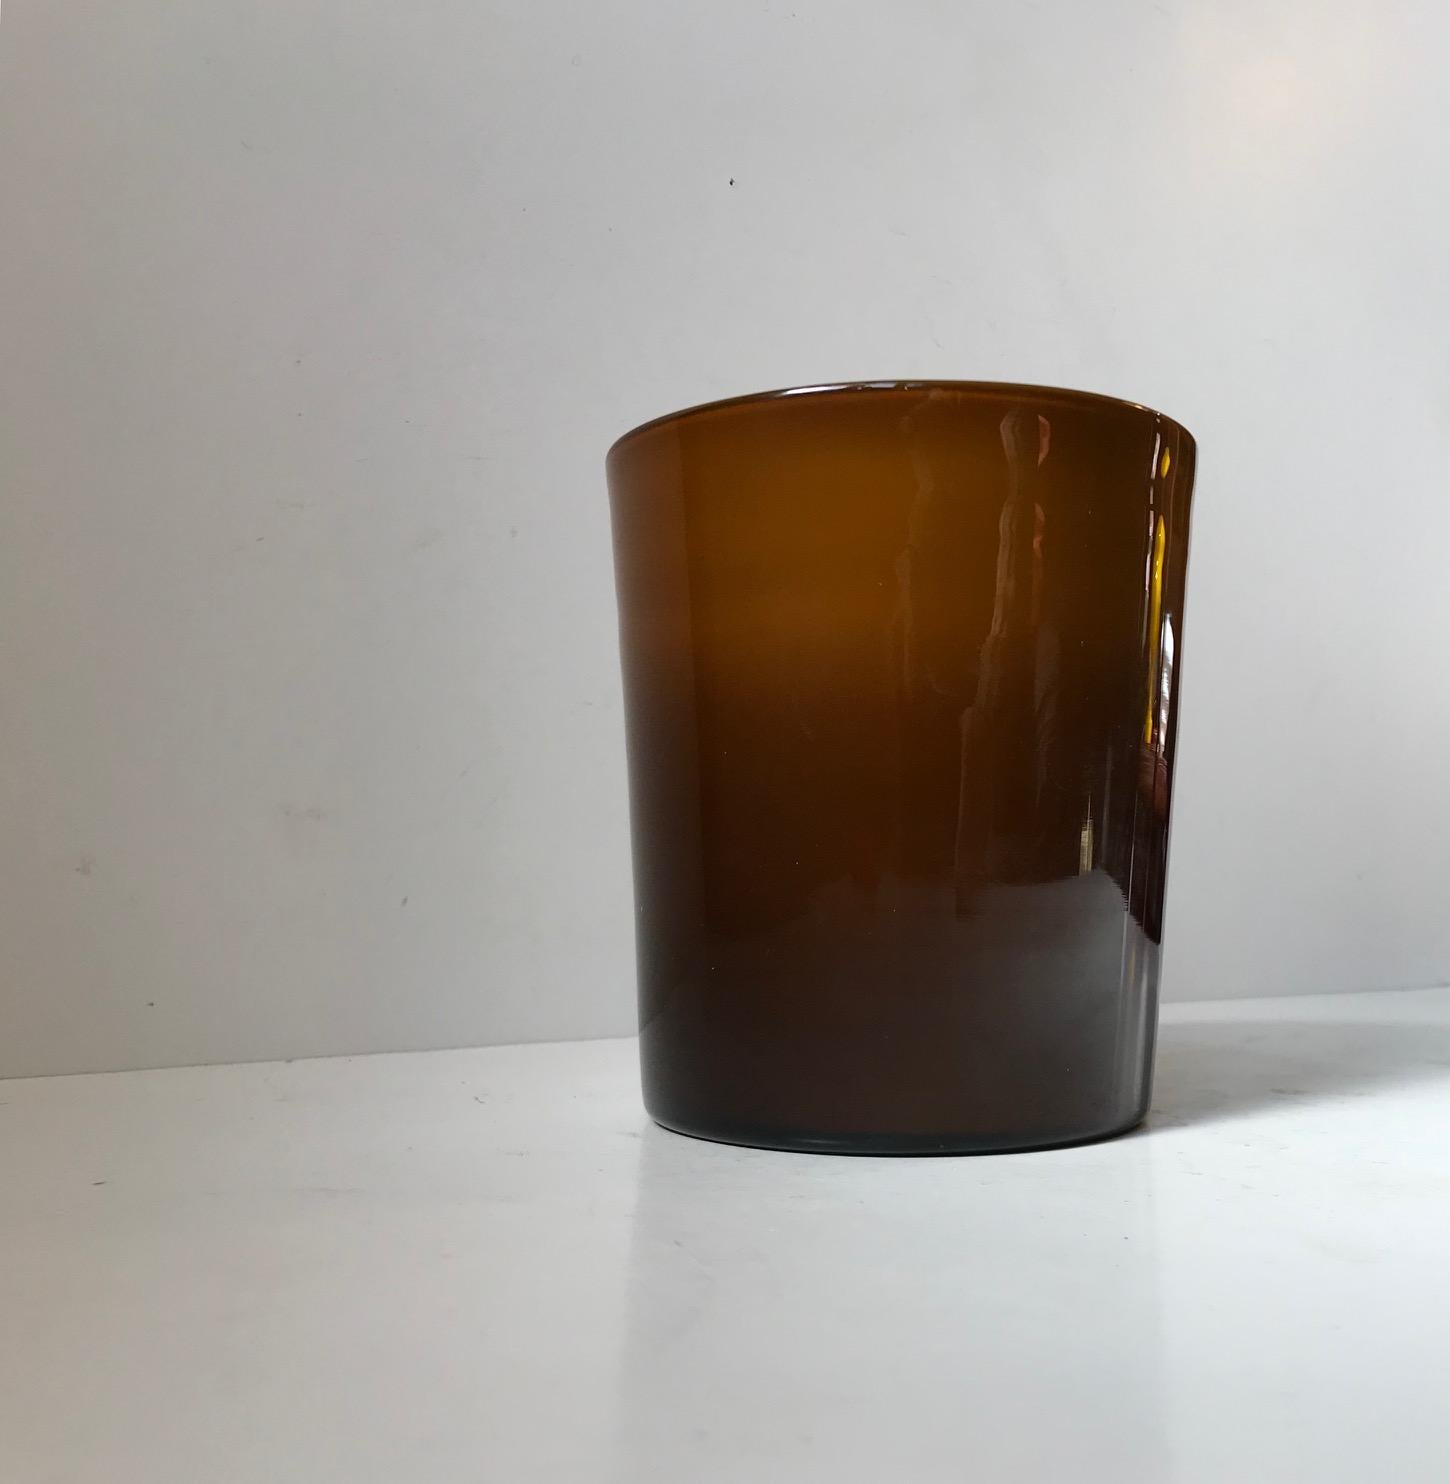 A rare colored hand blown flower pot or vase designed by Michael Bang as a part of the series Palet. The exterior glass is caramel in color: brown and orange depending on how the light hits it. The interior glass is opaline or milk glass. It was